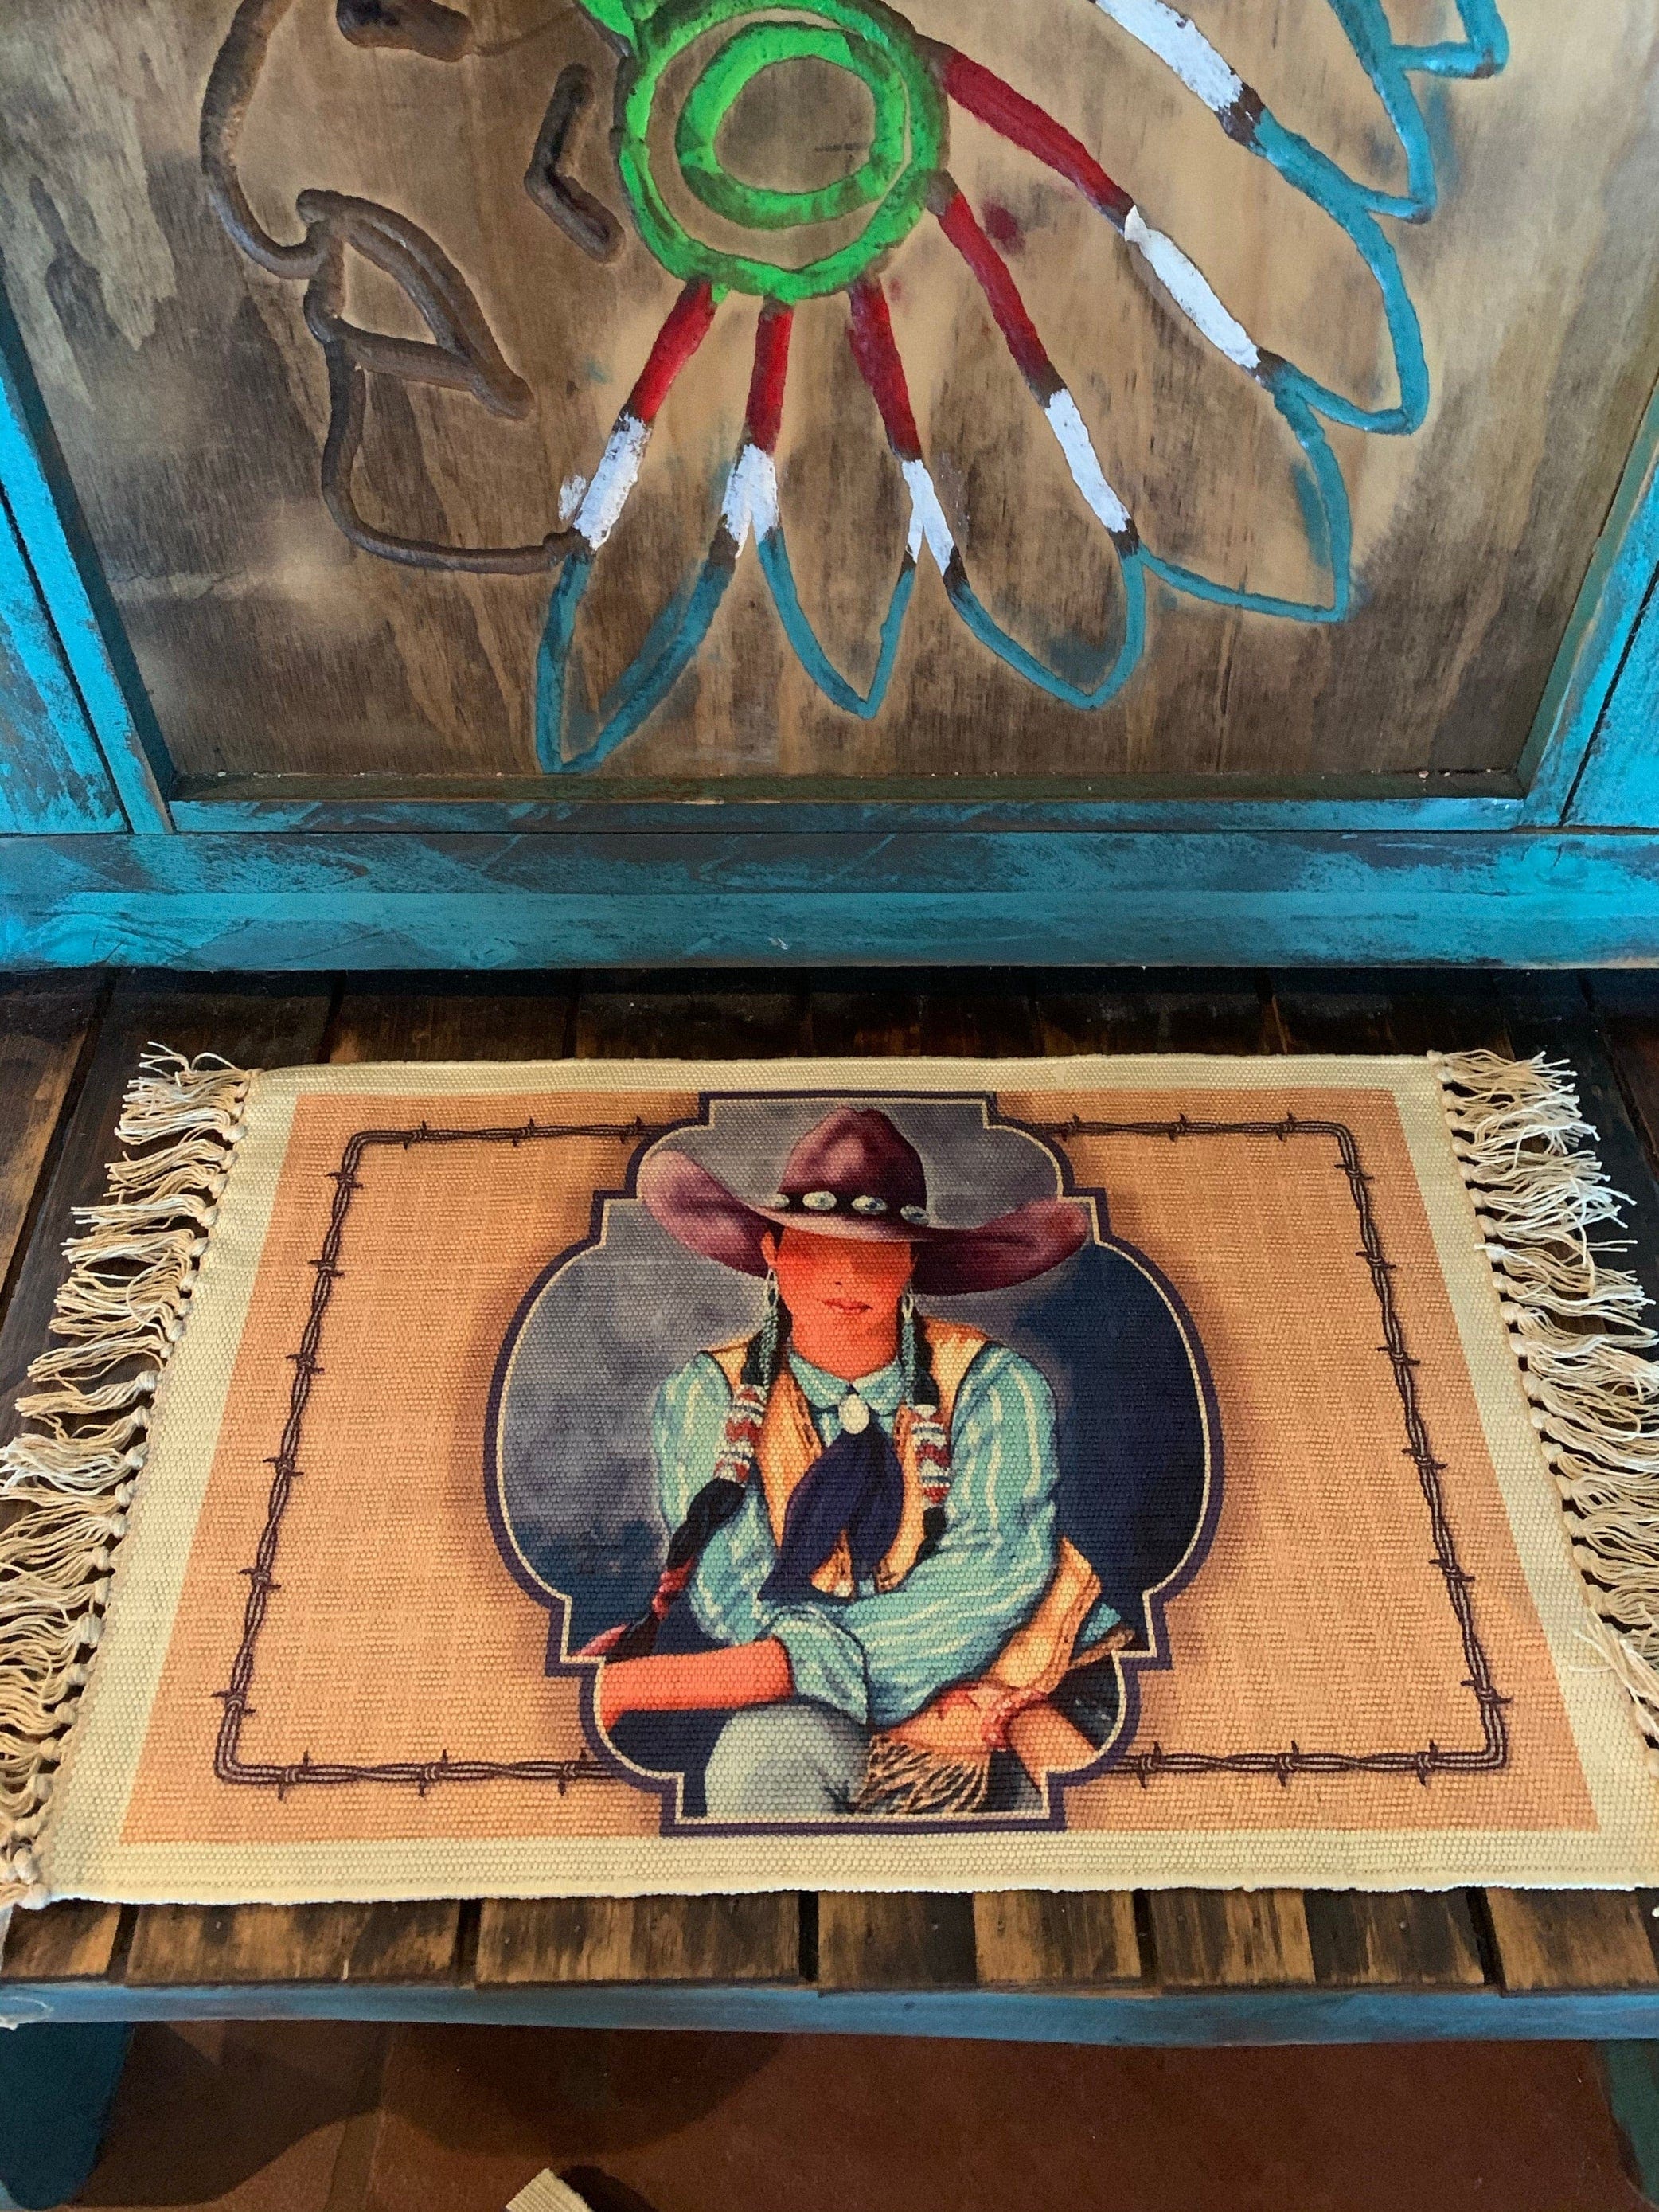 1 Cowgirl placemat Southwest Bedazzle home decor